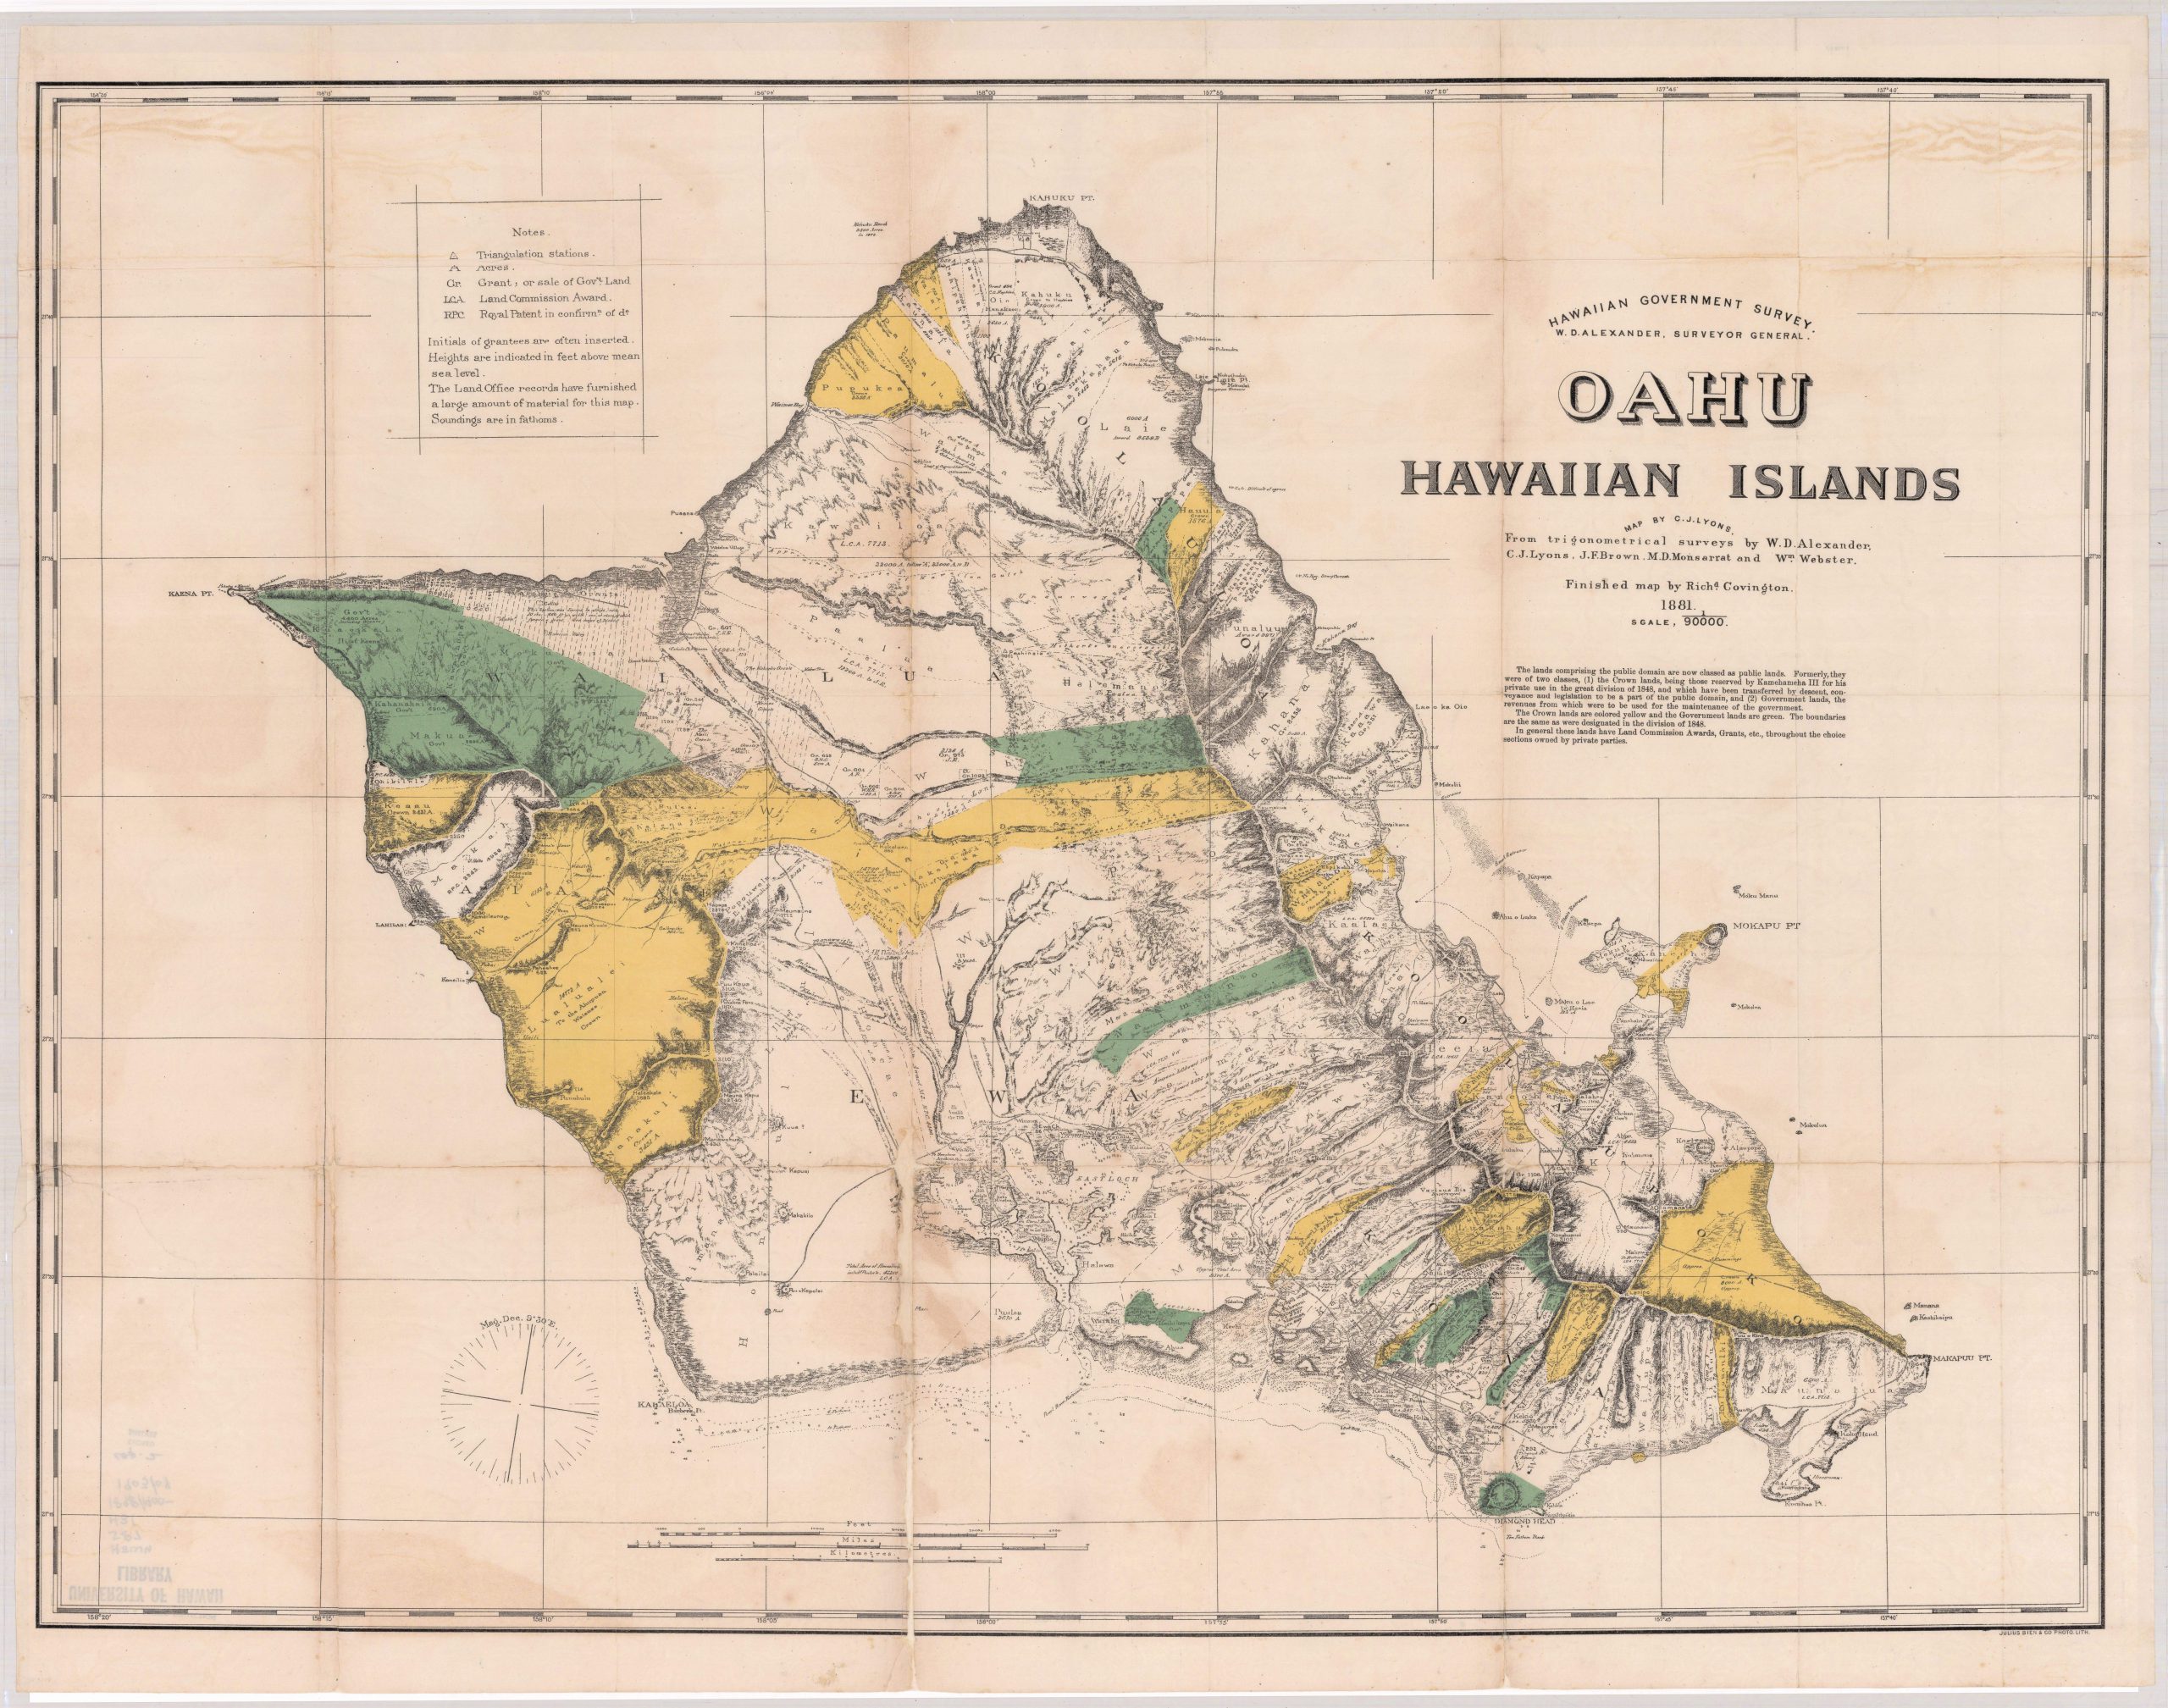 A map of O'ahu from 1881 showing the distinction between crown lands and government lands